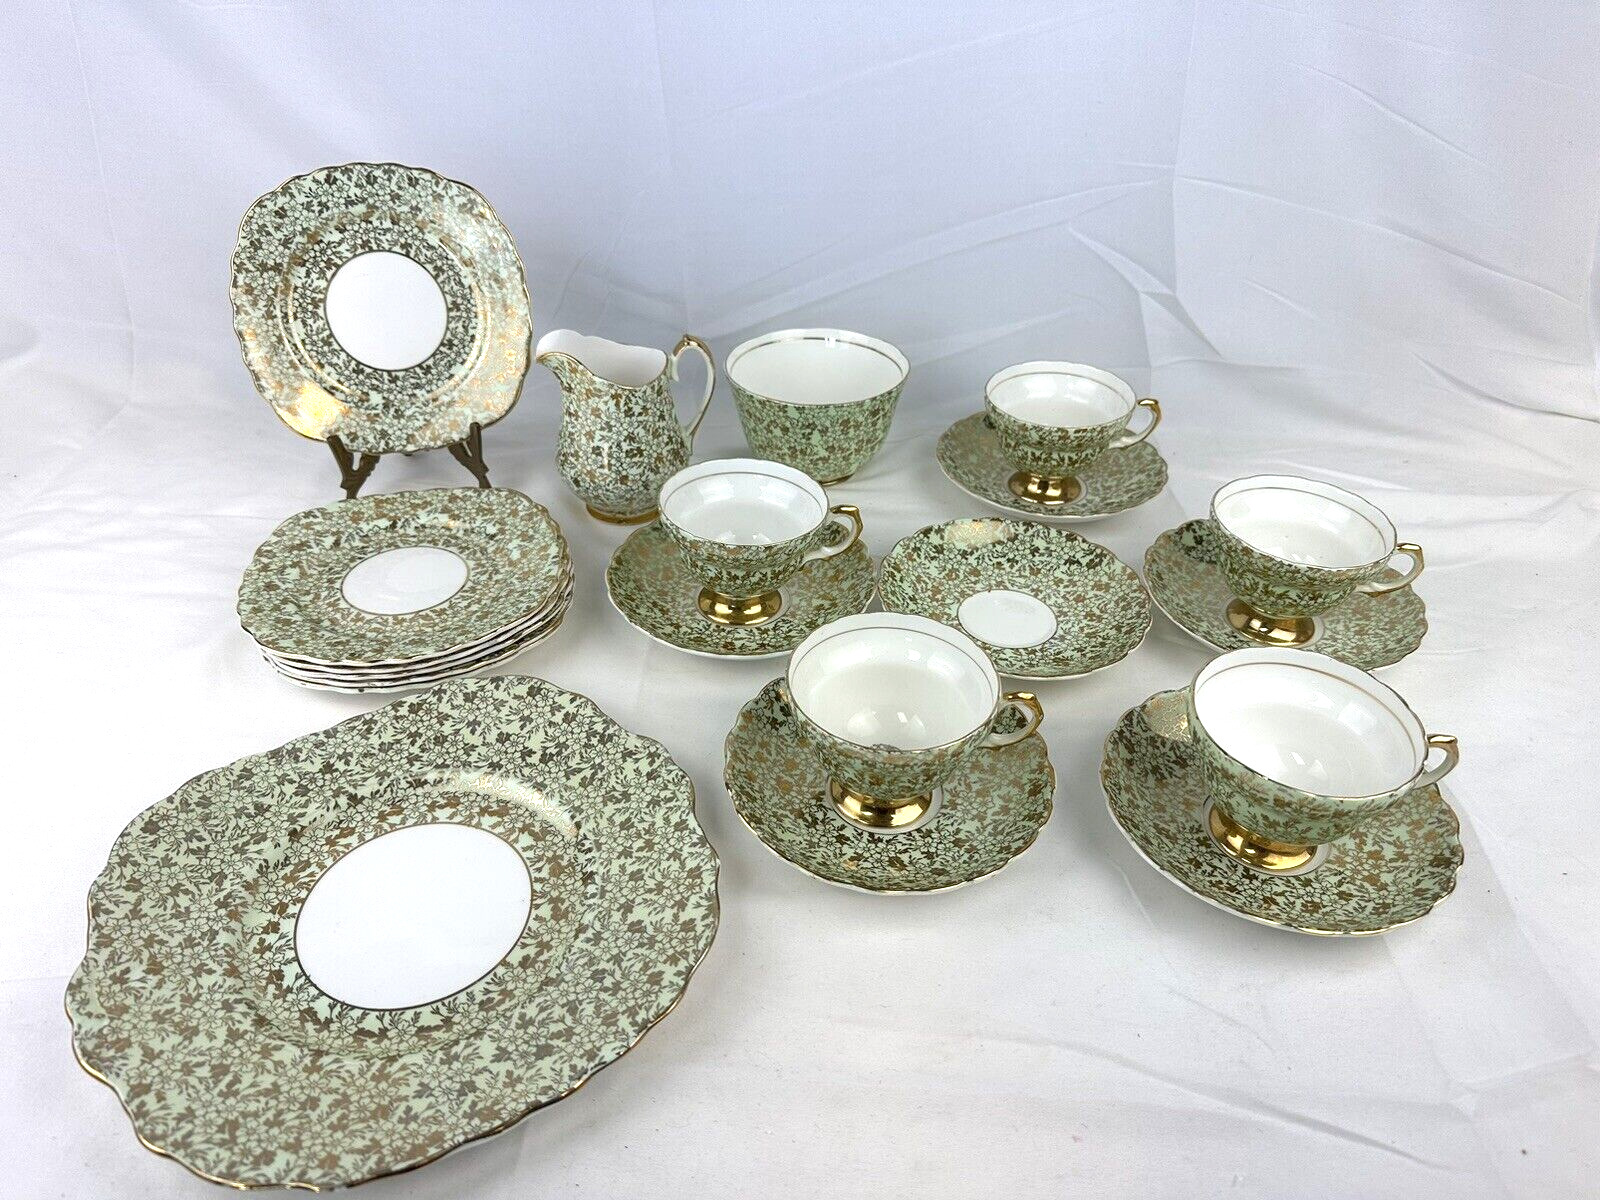 Vtg Imperial Bone China Cup, Saucer and Snack Plate Set Warranted 22 Kt. Gold H1